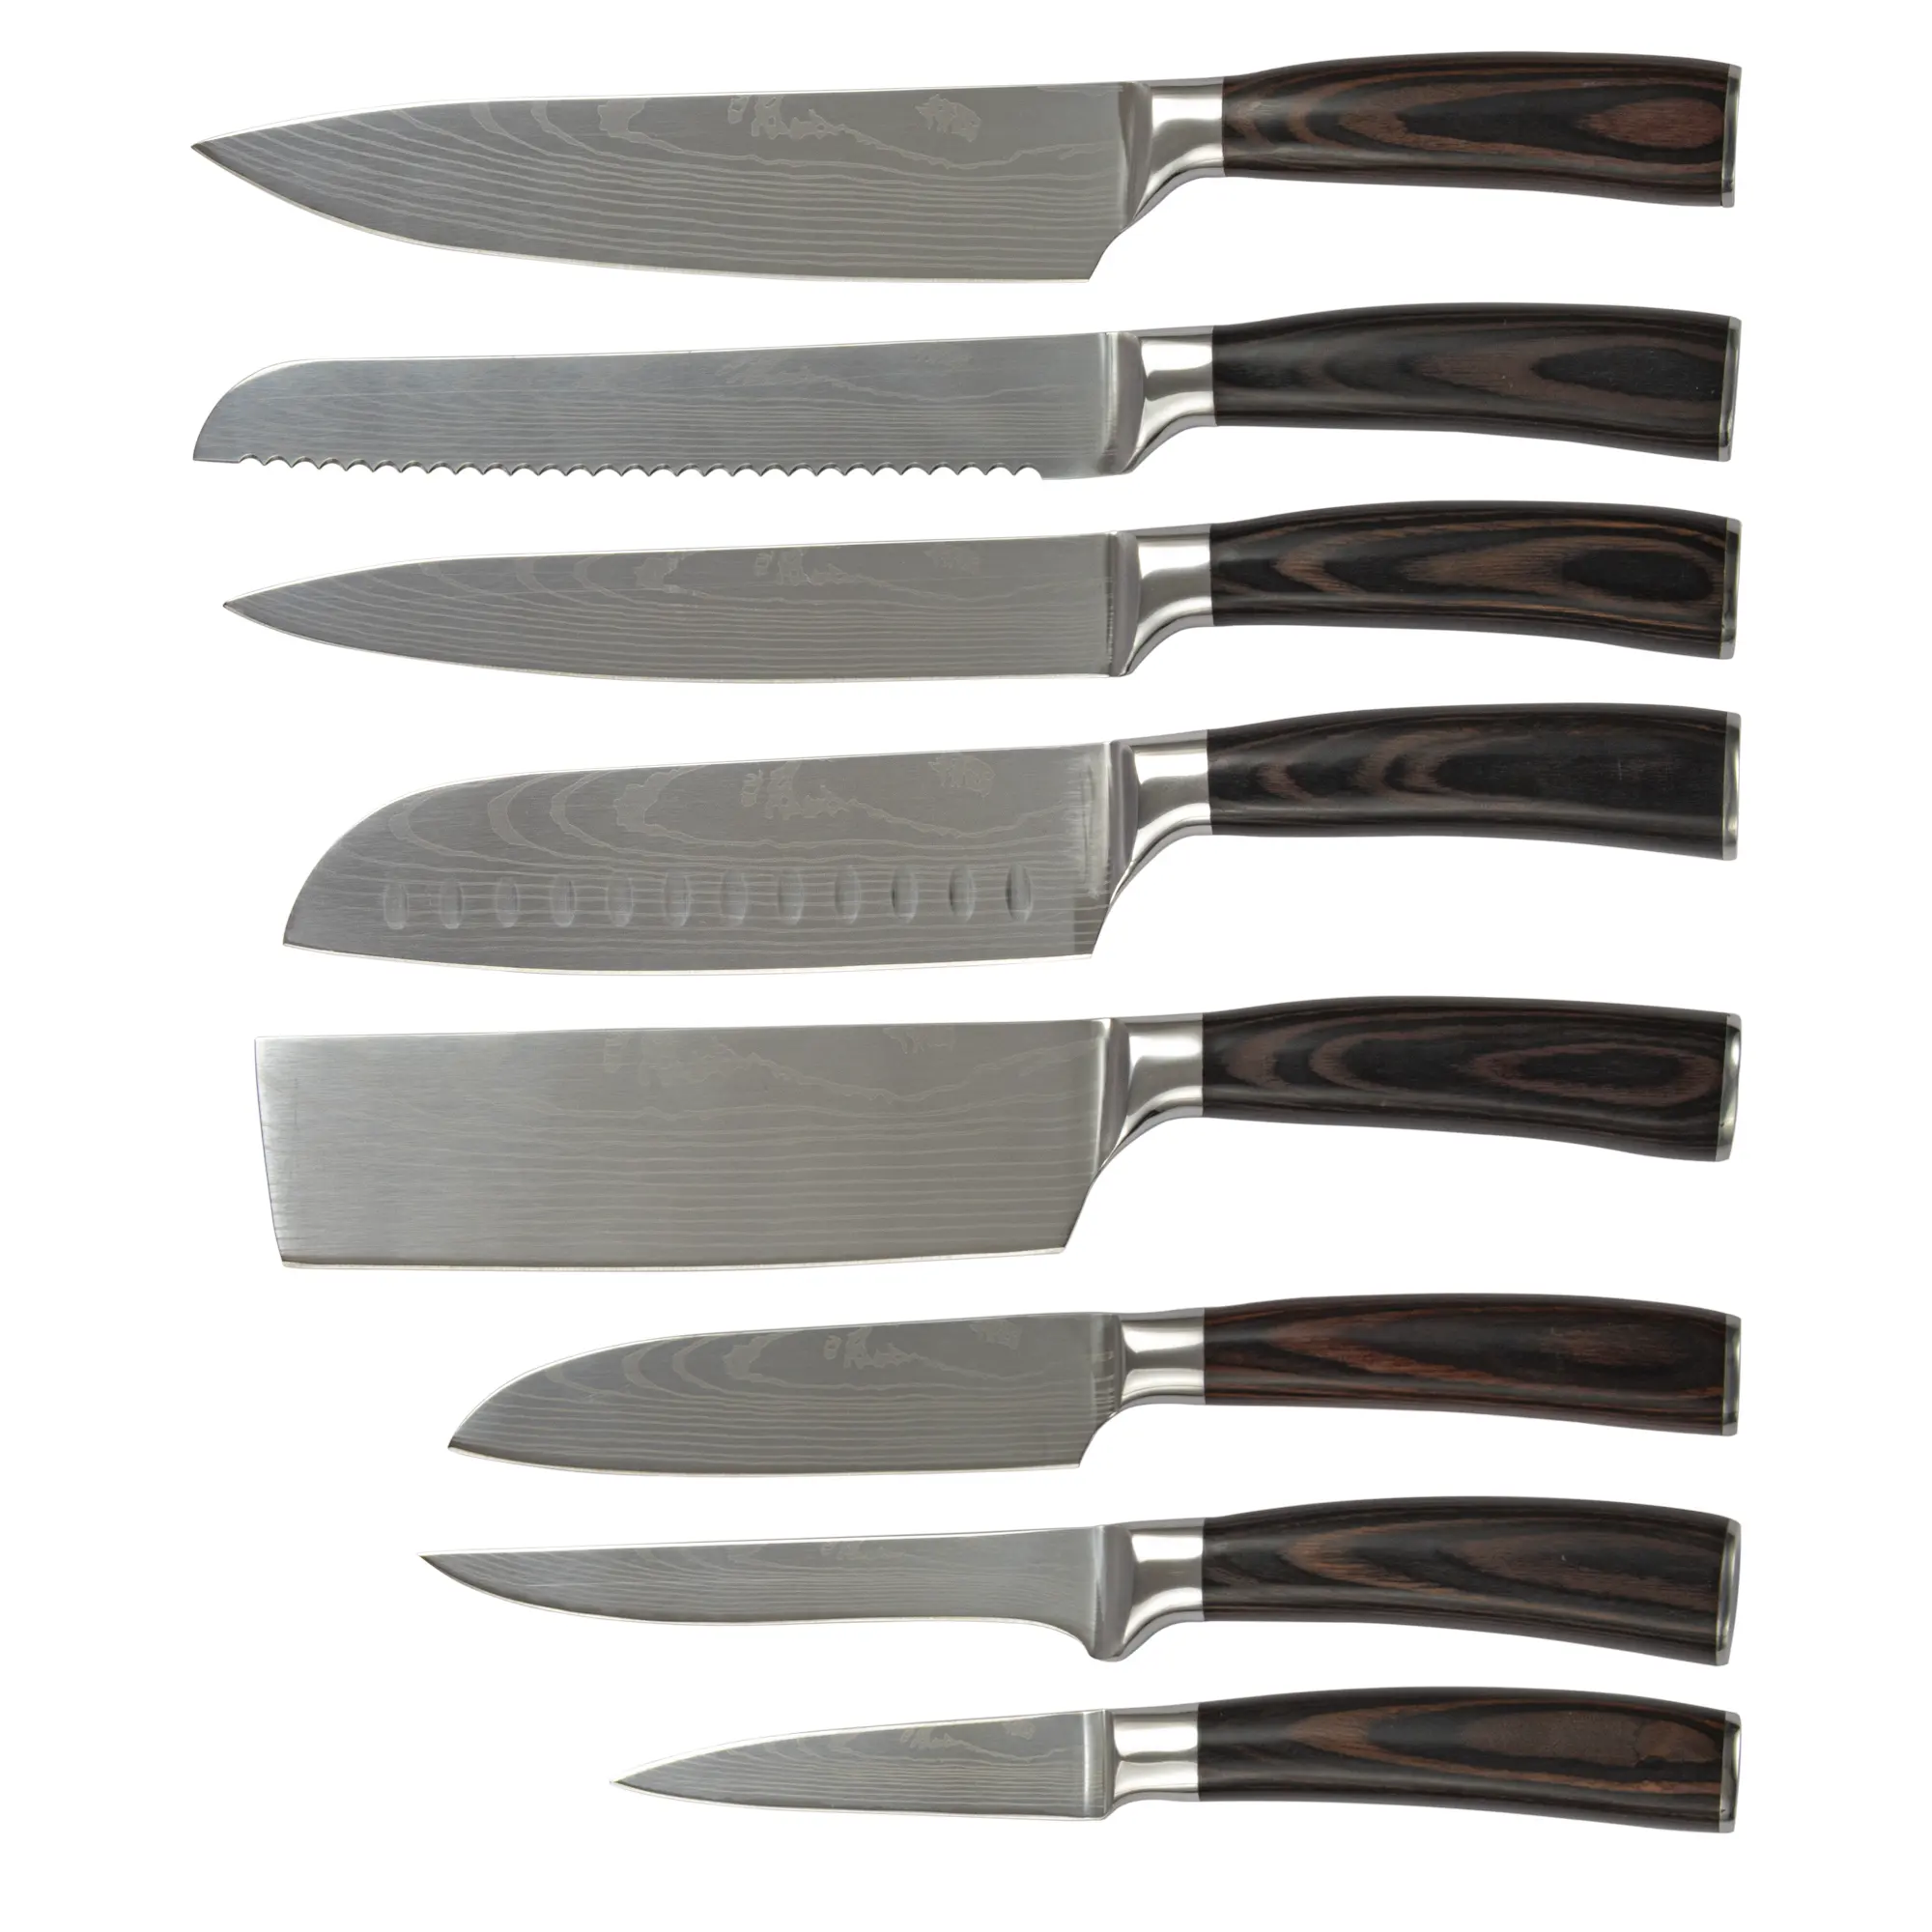 Damascus Steel Blade Kitchen Knife 8pcs New Classic Germany Damascus Knives Set With Gift Box